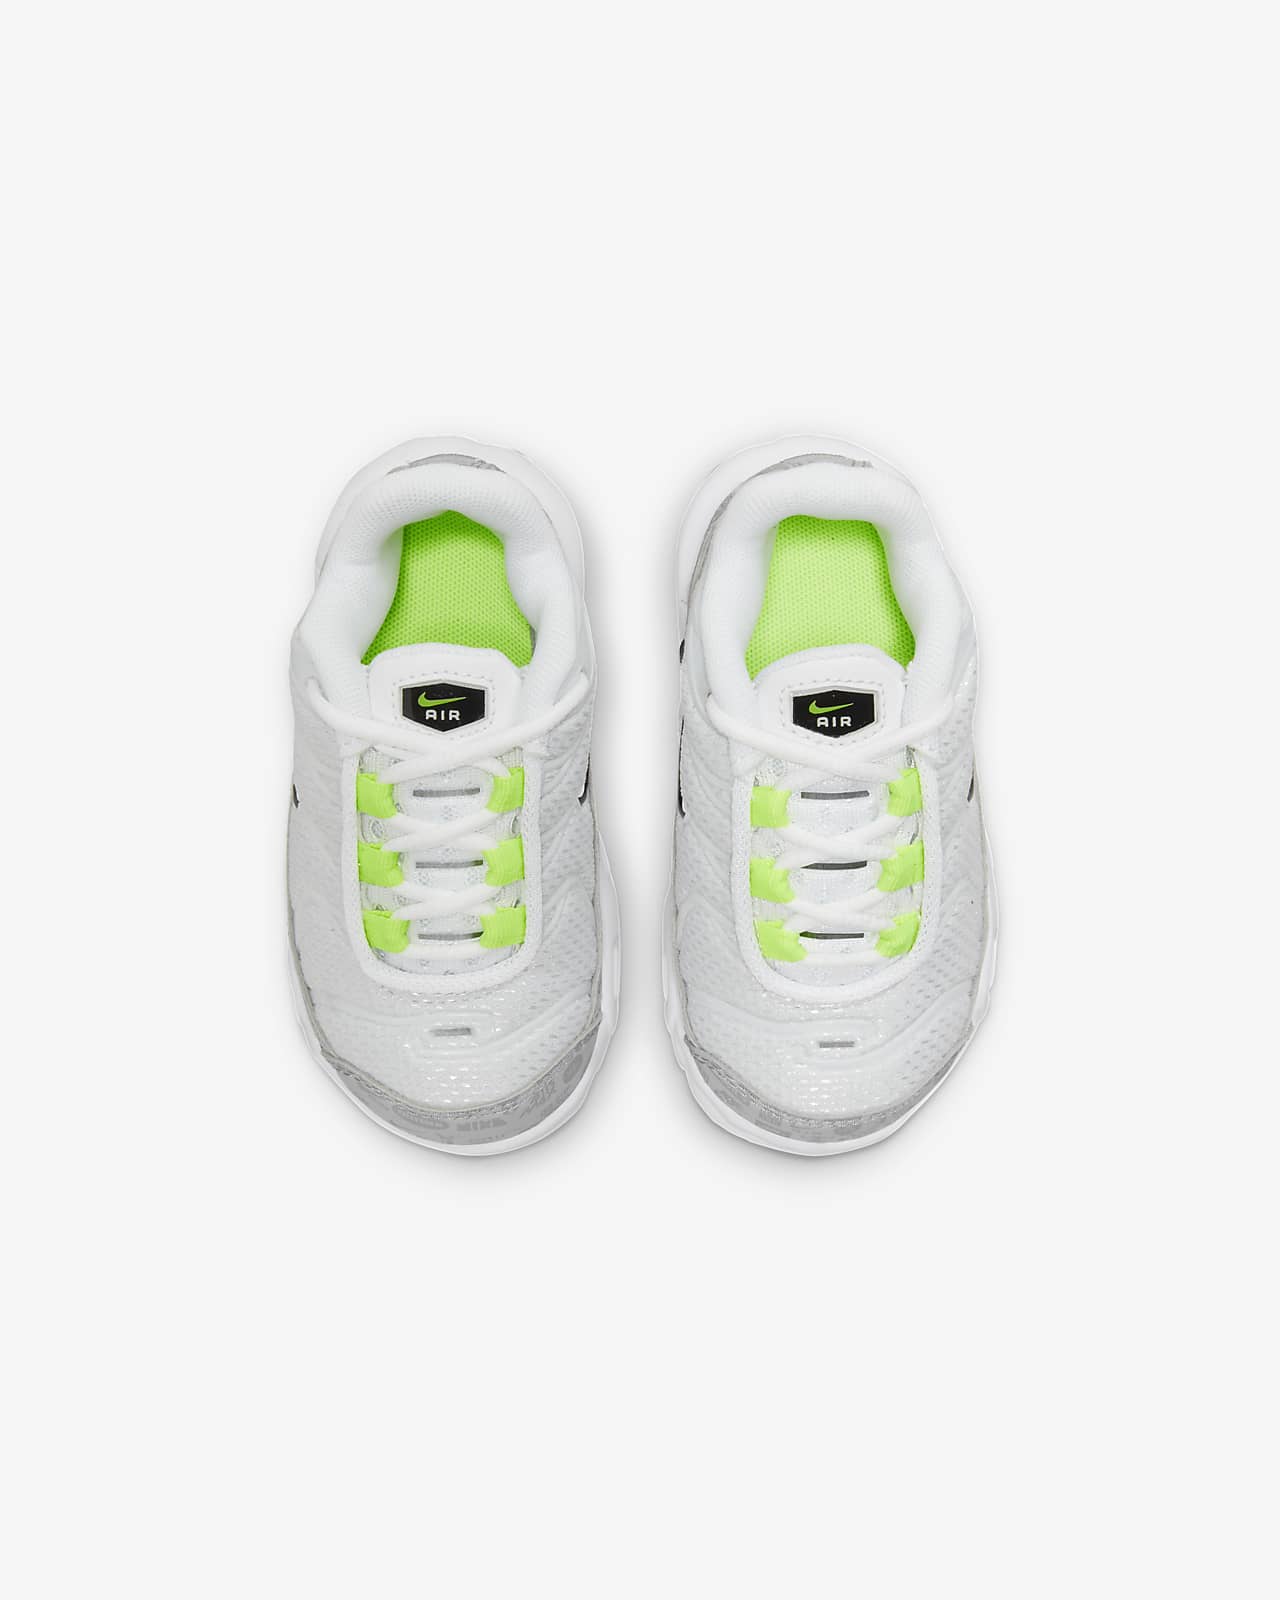 Nike Air Max Plus Baby and Toddler Shoe 